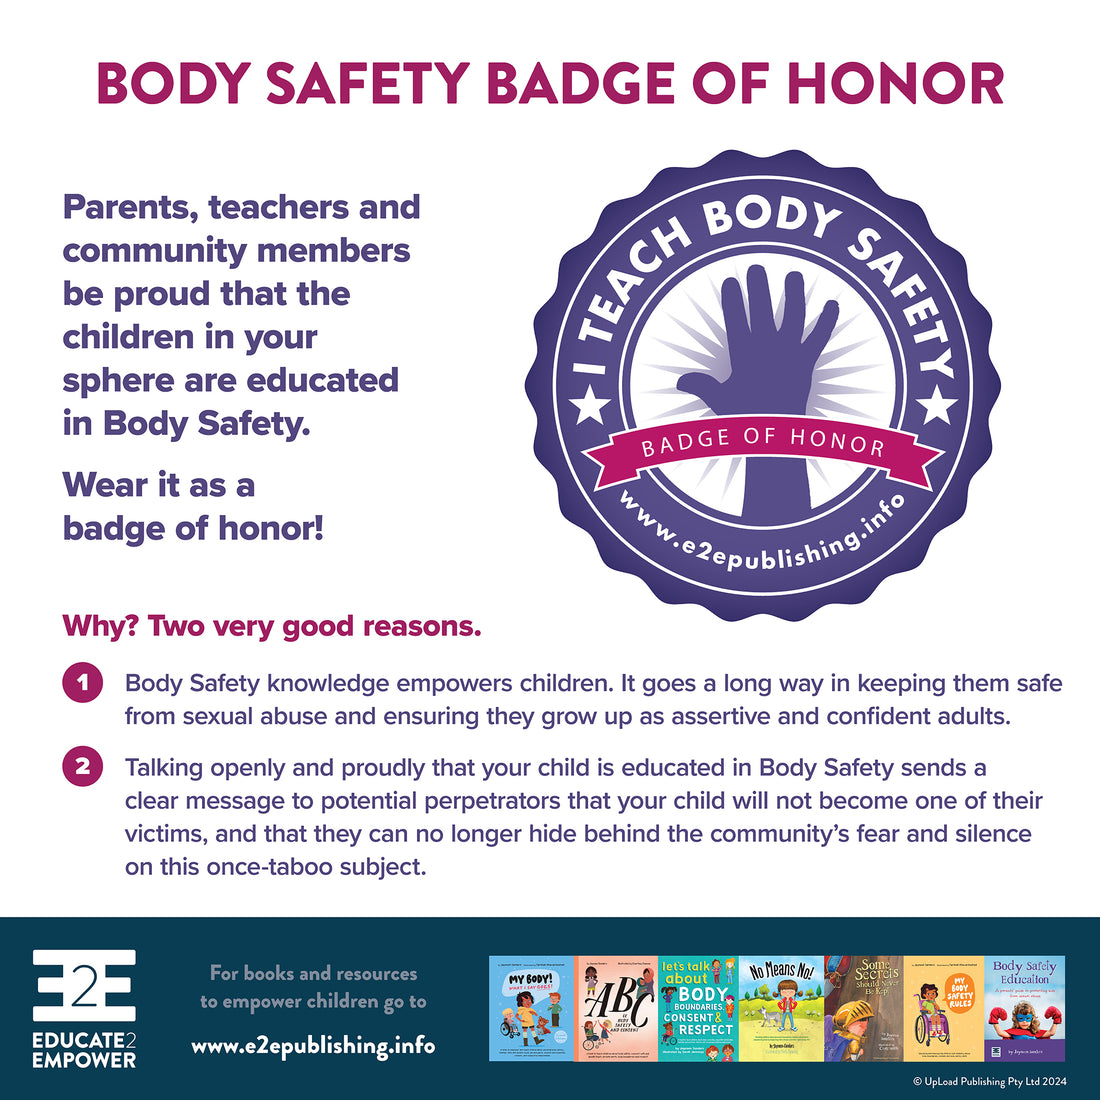 BODY SAFETY BADGE OF HONOR